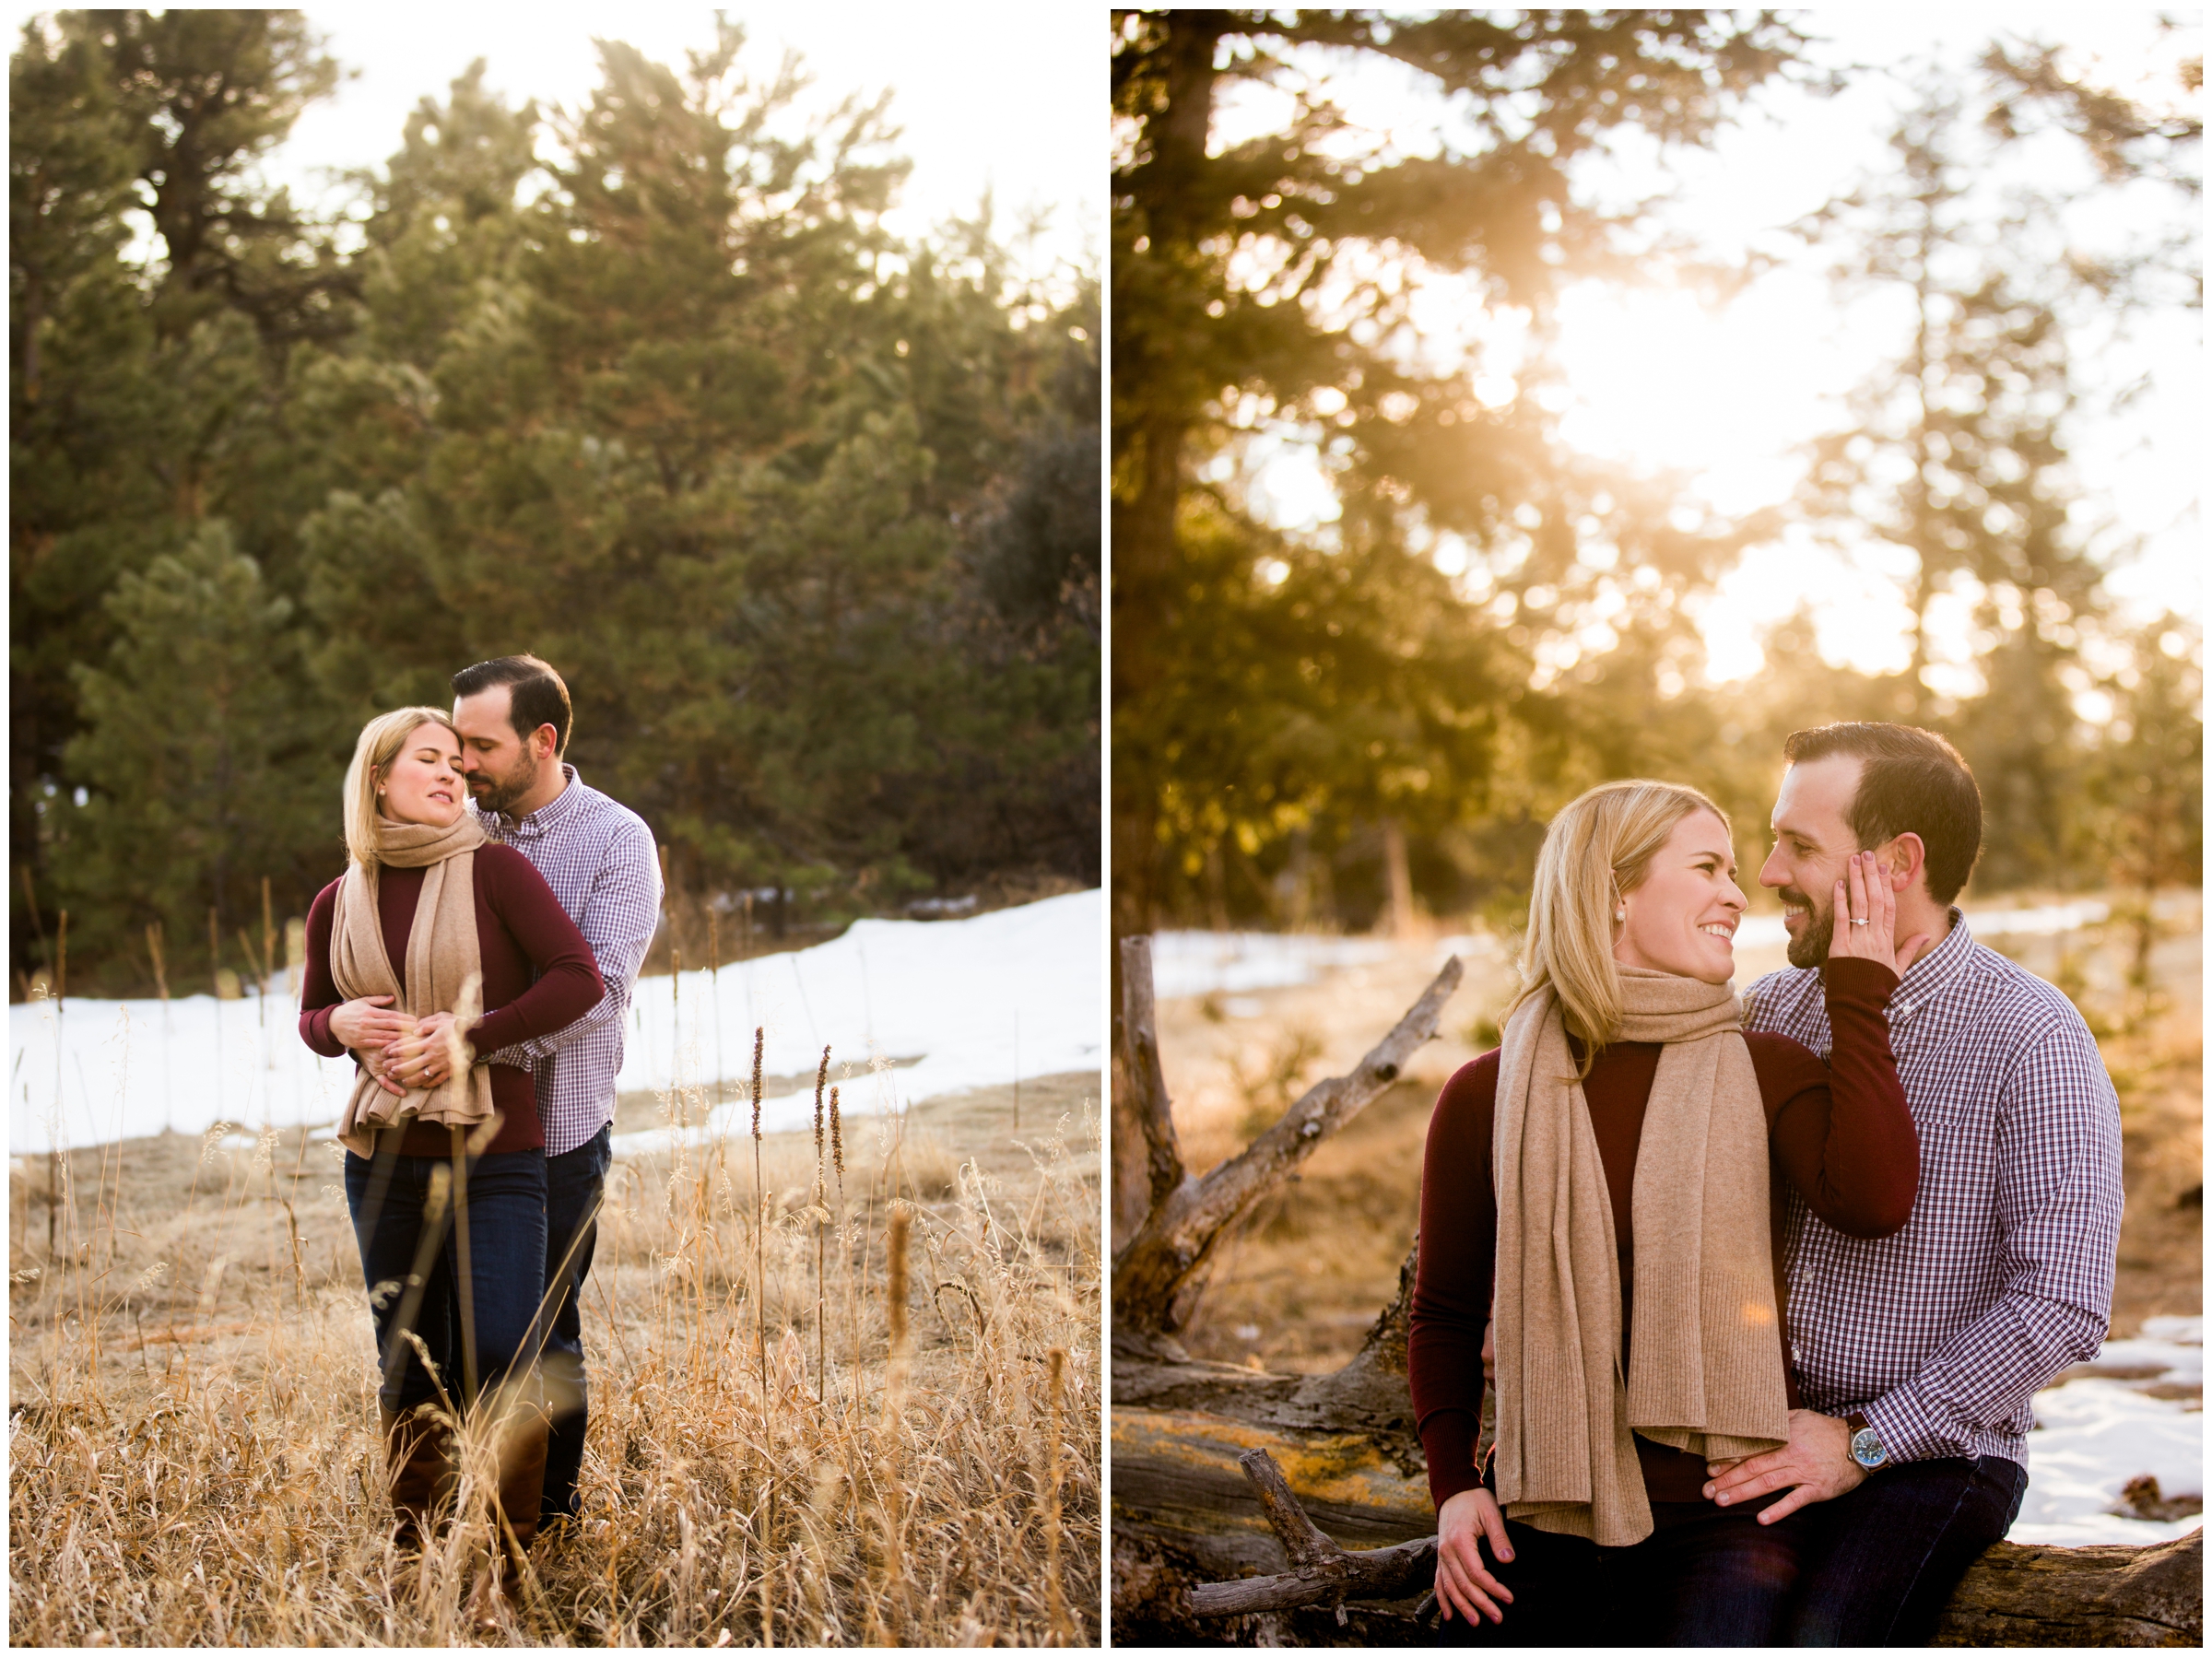 sunny and snowy engagement photography inspiration by Colorado mountain photographer Plum Pretty Photo 